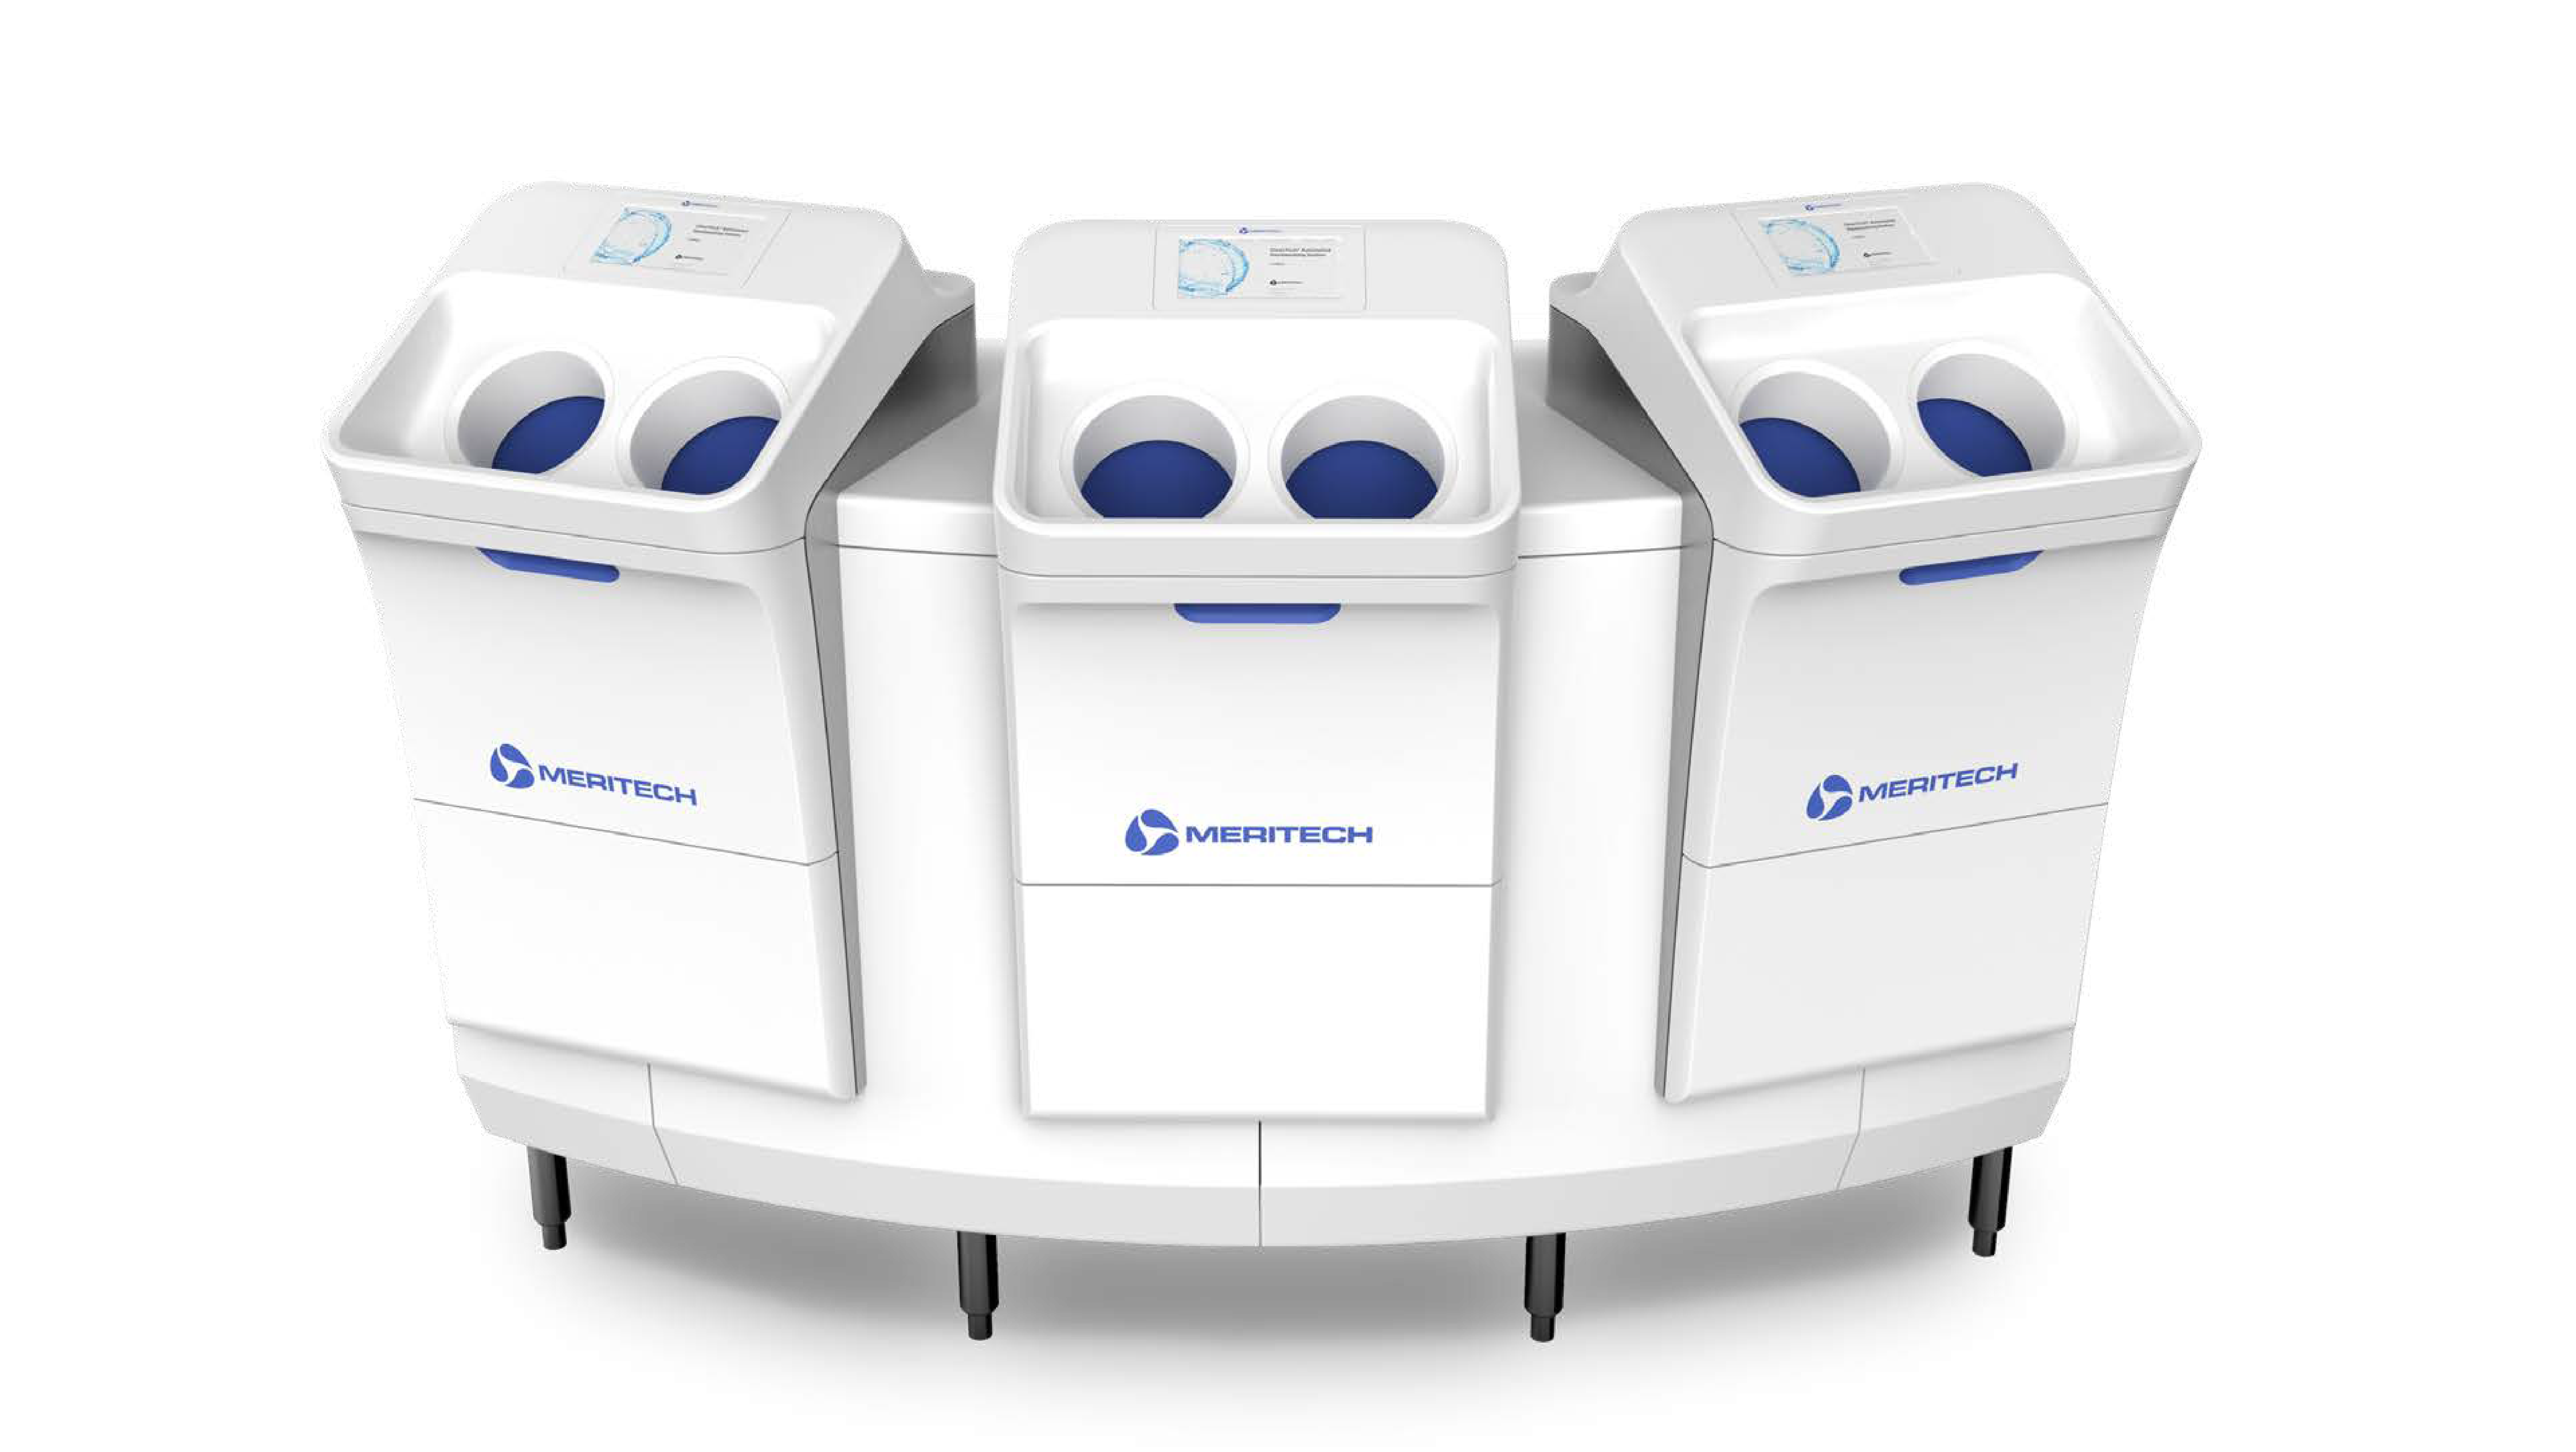 Product Hero Image of the Meritech EVOS, 3 Handwashing devices next to each other